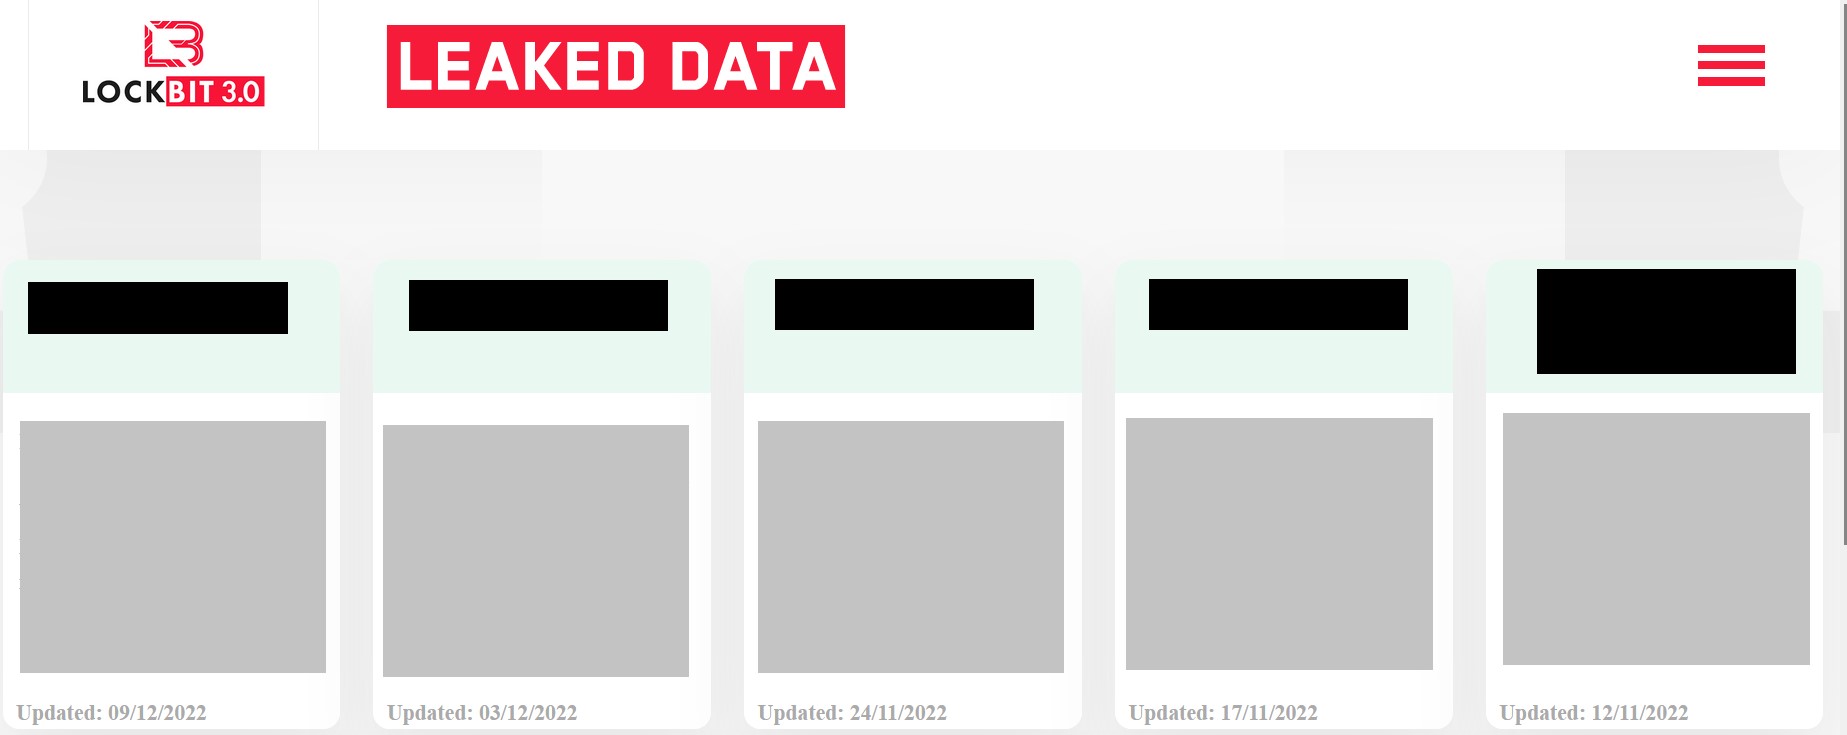 "Leaked Data" site suggests it is LockBit 3.0. by using its graphics. Image: DataBreaches.net